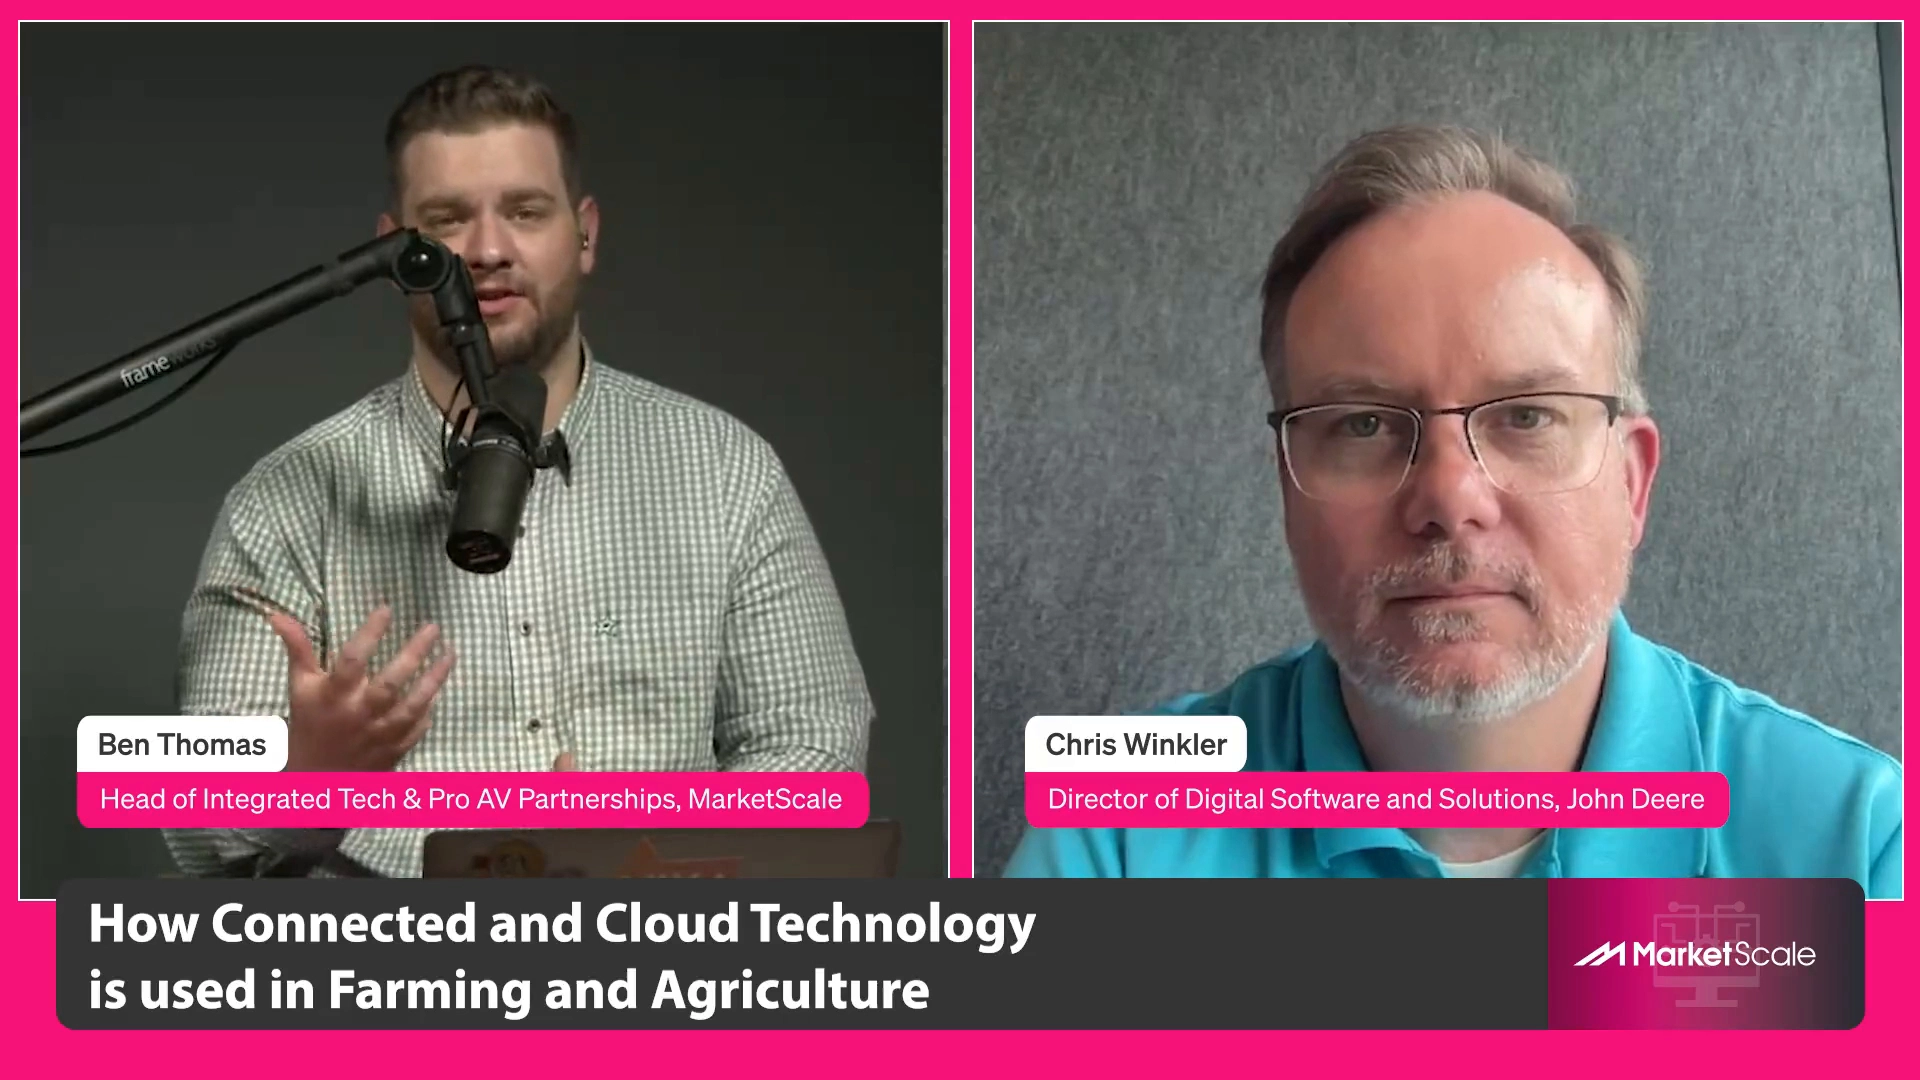 Leveraging Connected and Cloud Technologies to Address Farming and Agriculture Challenges